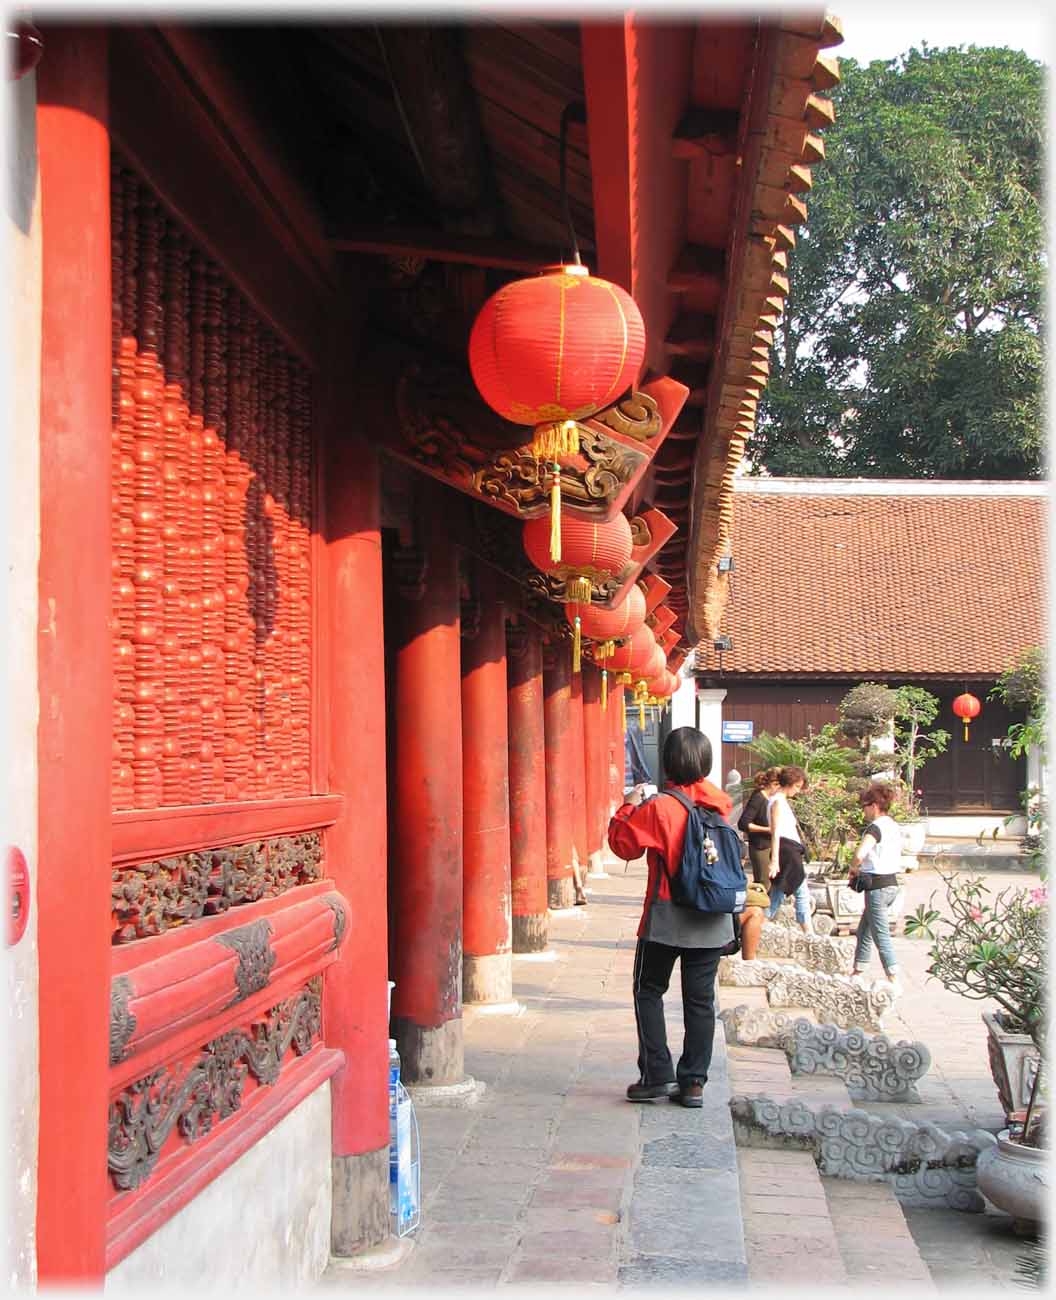 Looking close to and along red pillars of large pavilion with red lanterns and woman in red jacket.